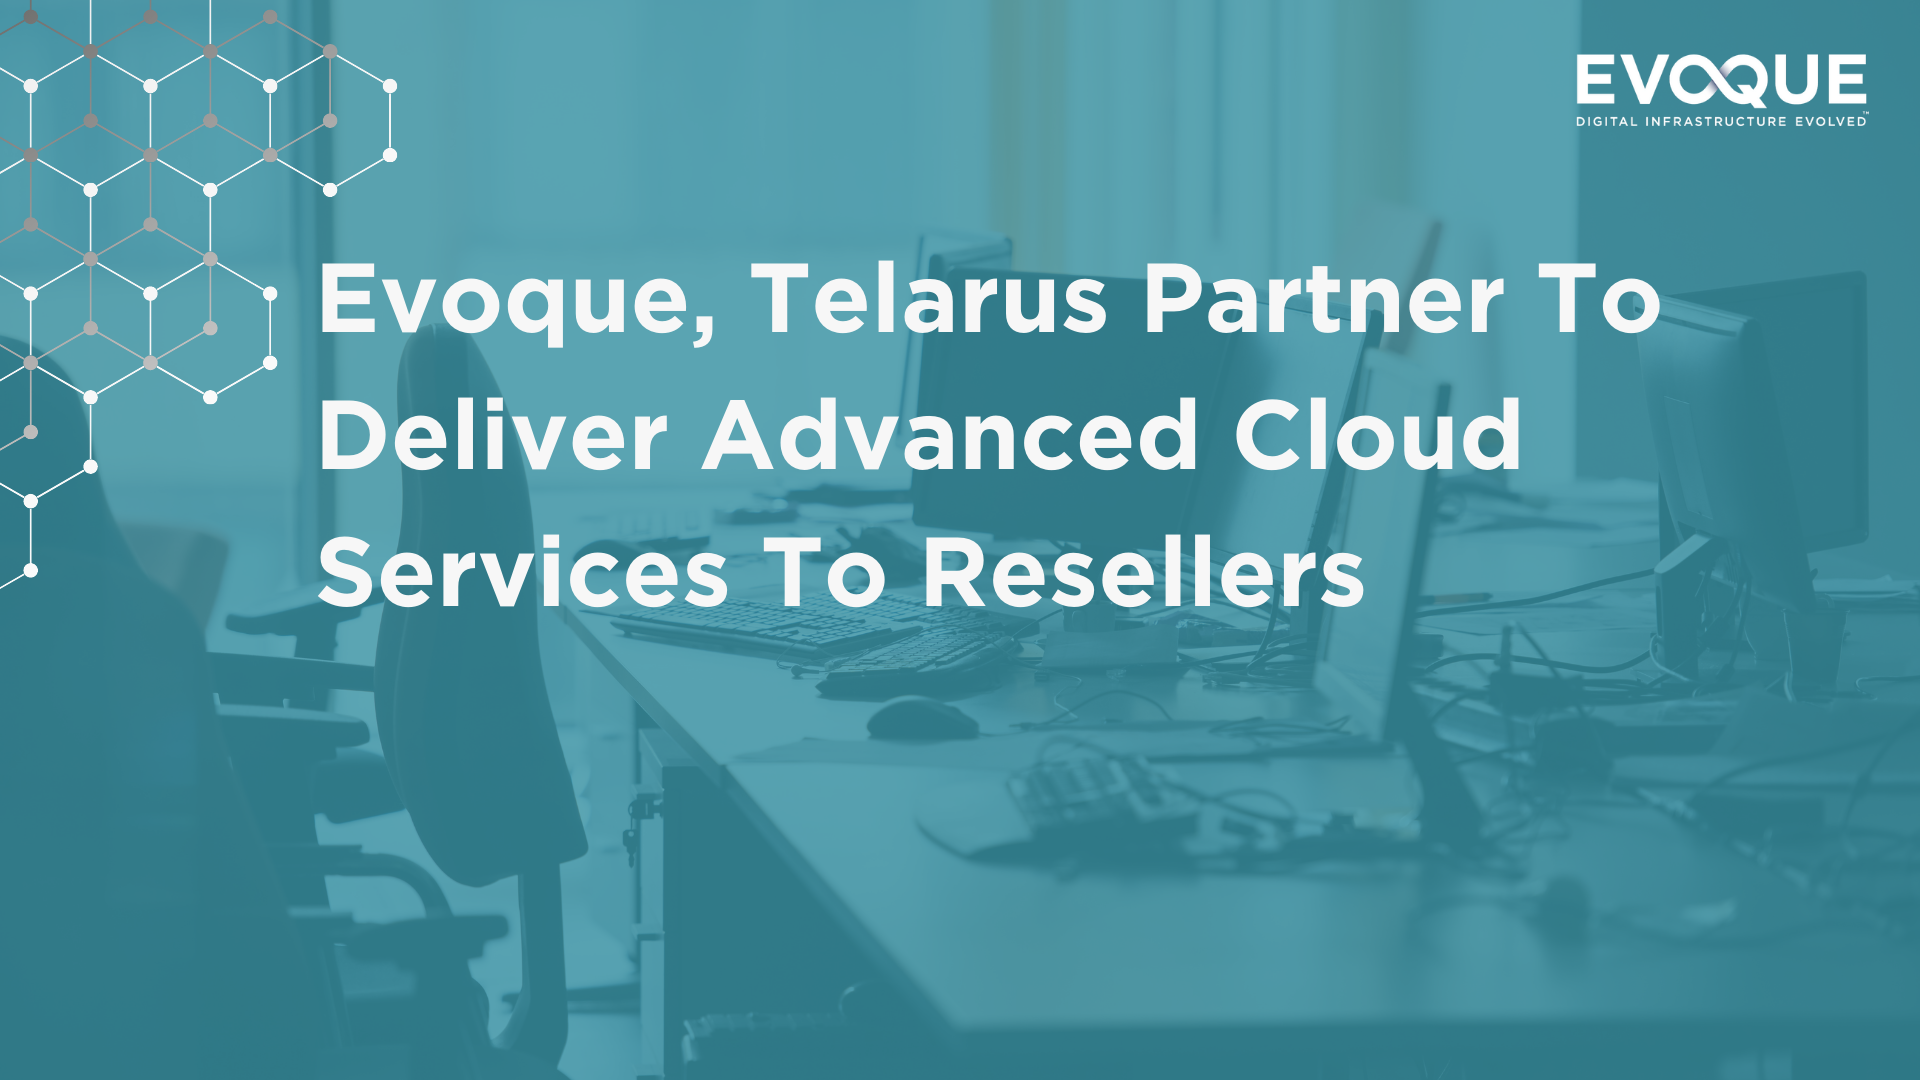 Evoque, Telarus Partner To Deliver Advanced Cloud Services To Resellers